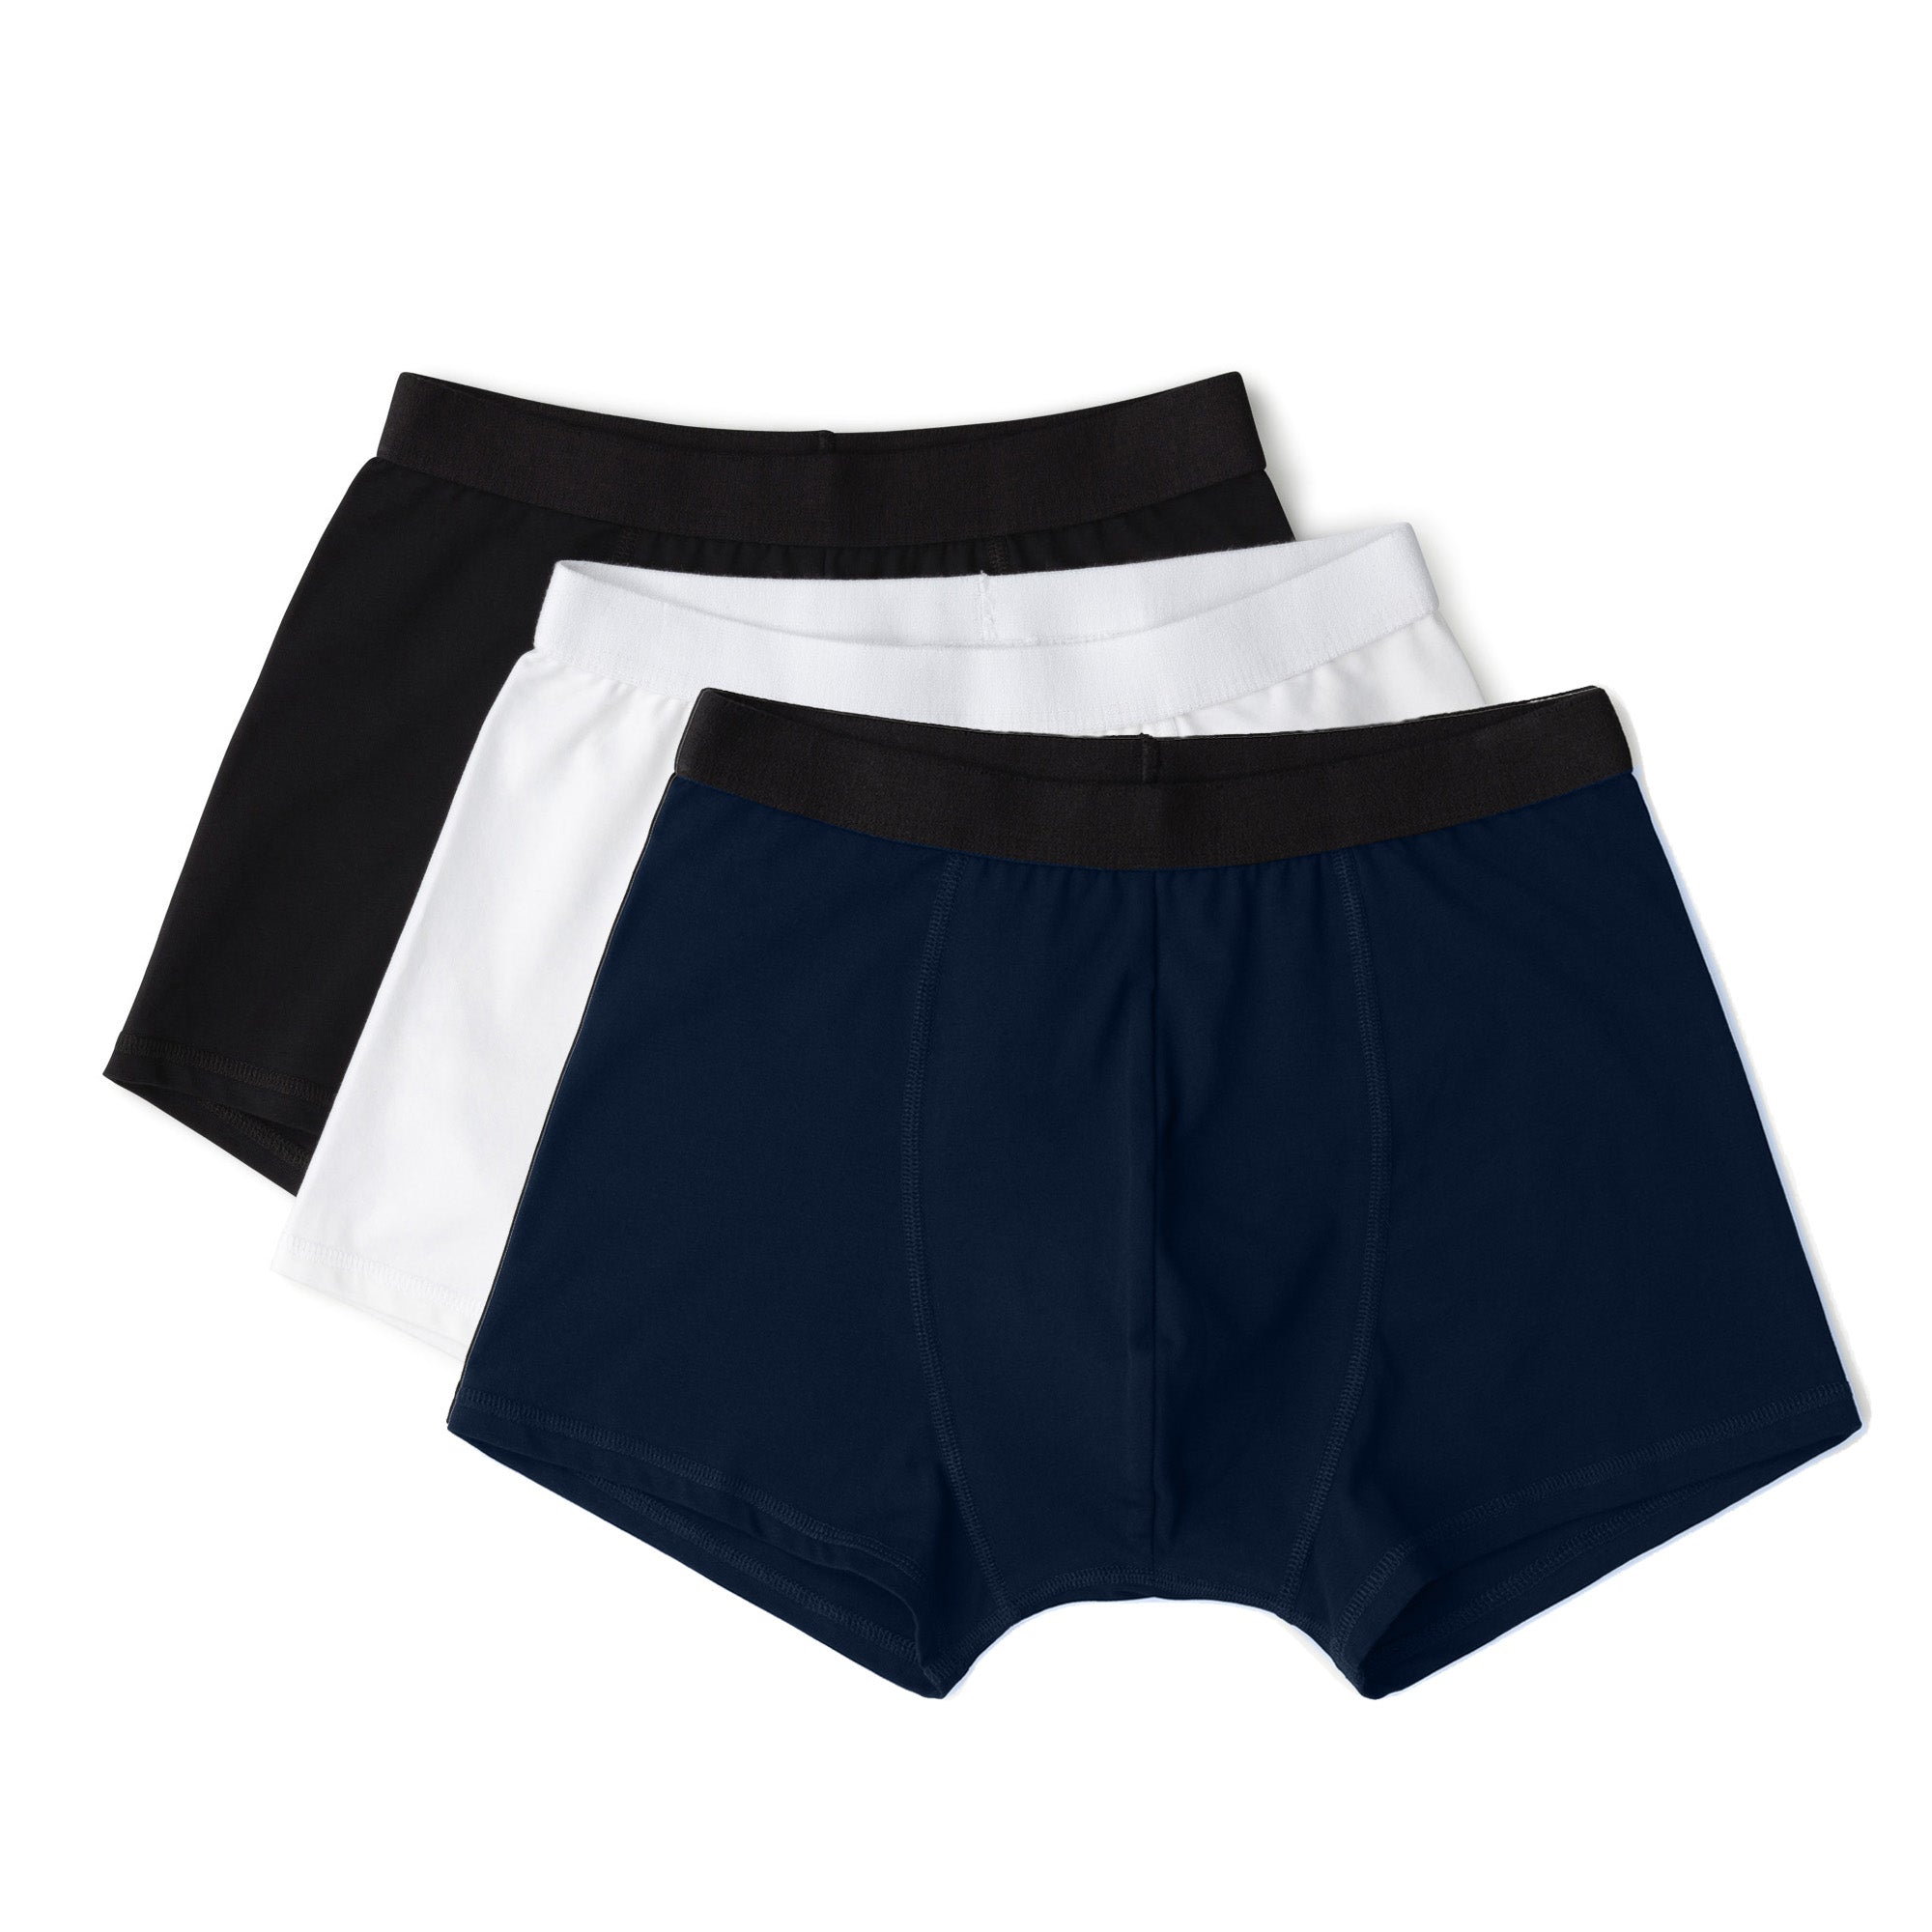 3-PACK OF BASIC BOXERS - Navy blue